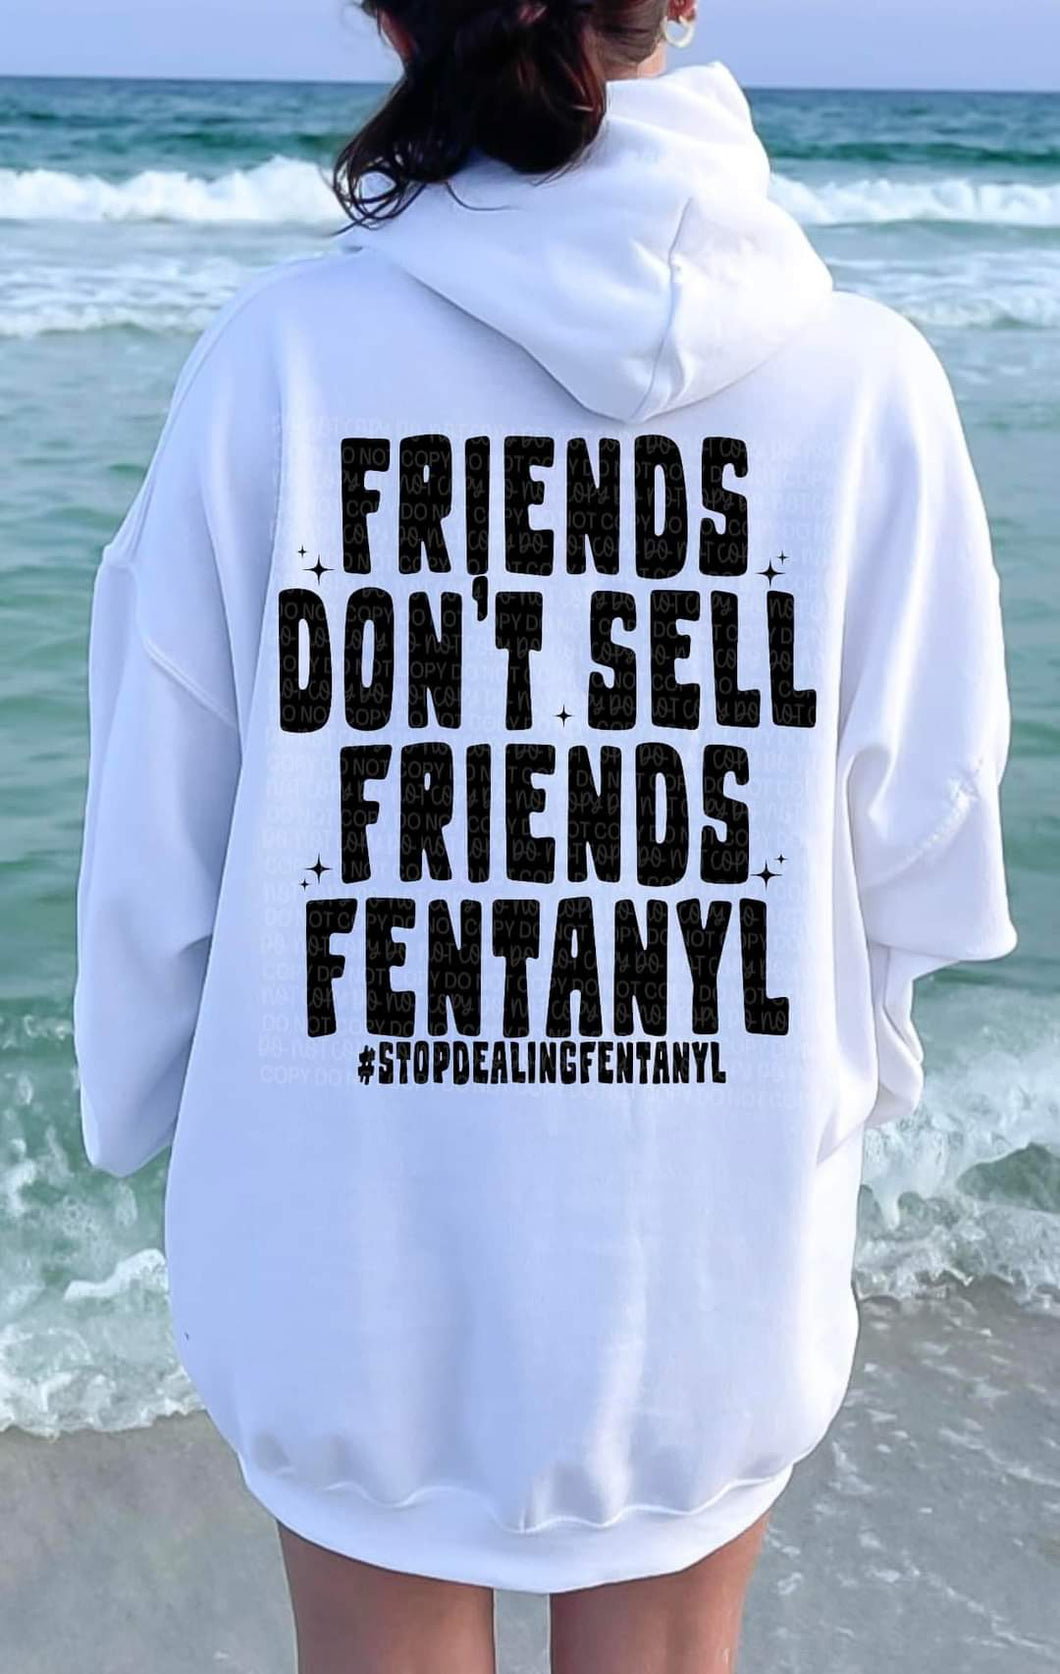 Friends dont sell friends fentanyl